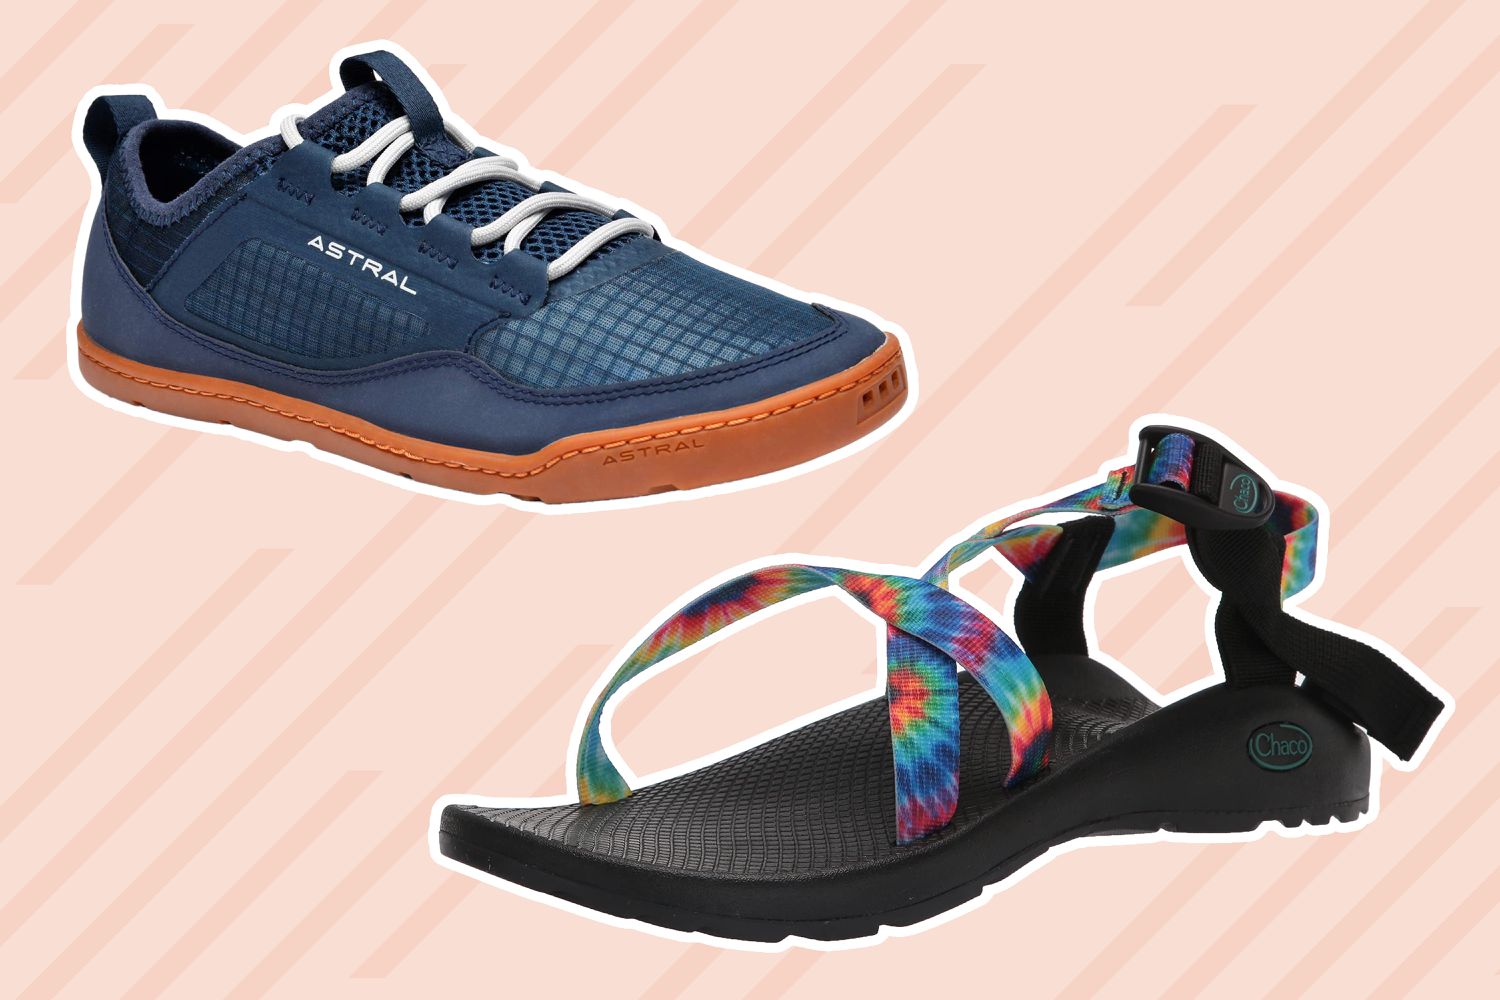 A collage of beach walking shoes we recommend on a striped pink background